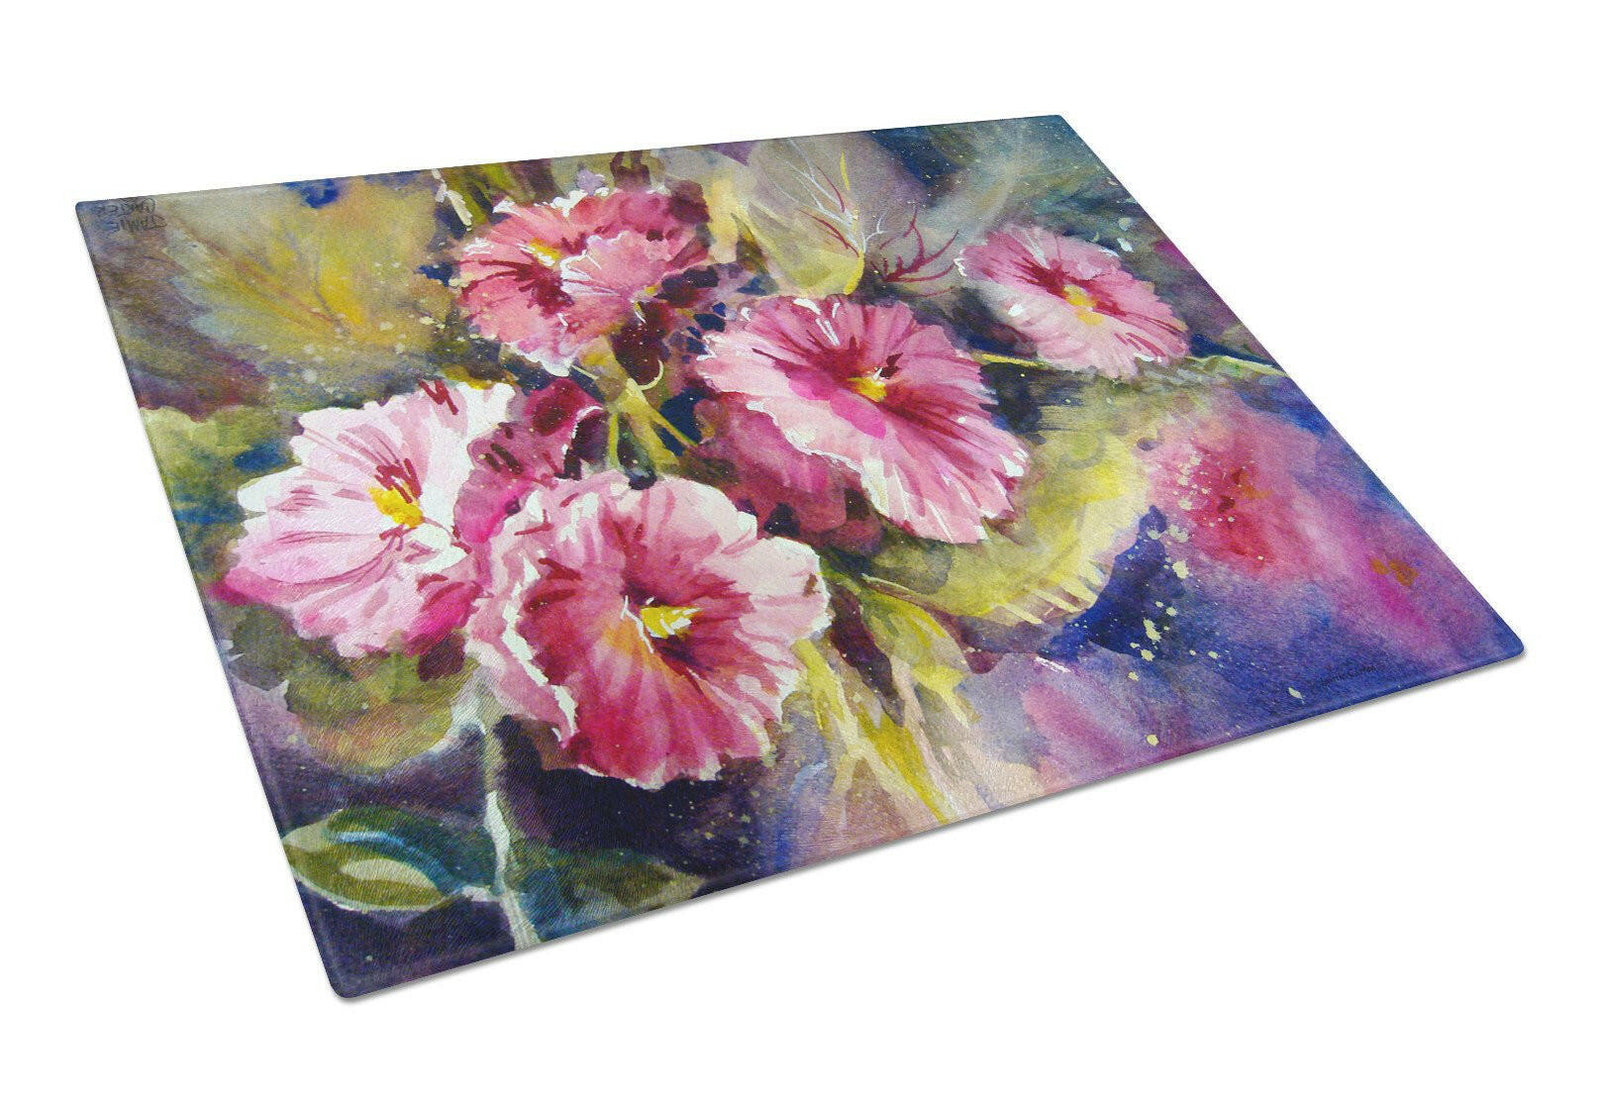 April Showers Bring Spring Flowers Glass Cutting Board Large PJC1106LCB by Caroline's Treasures